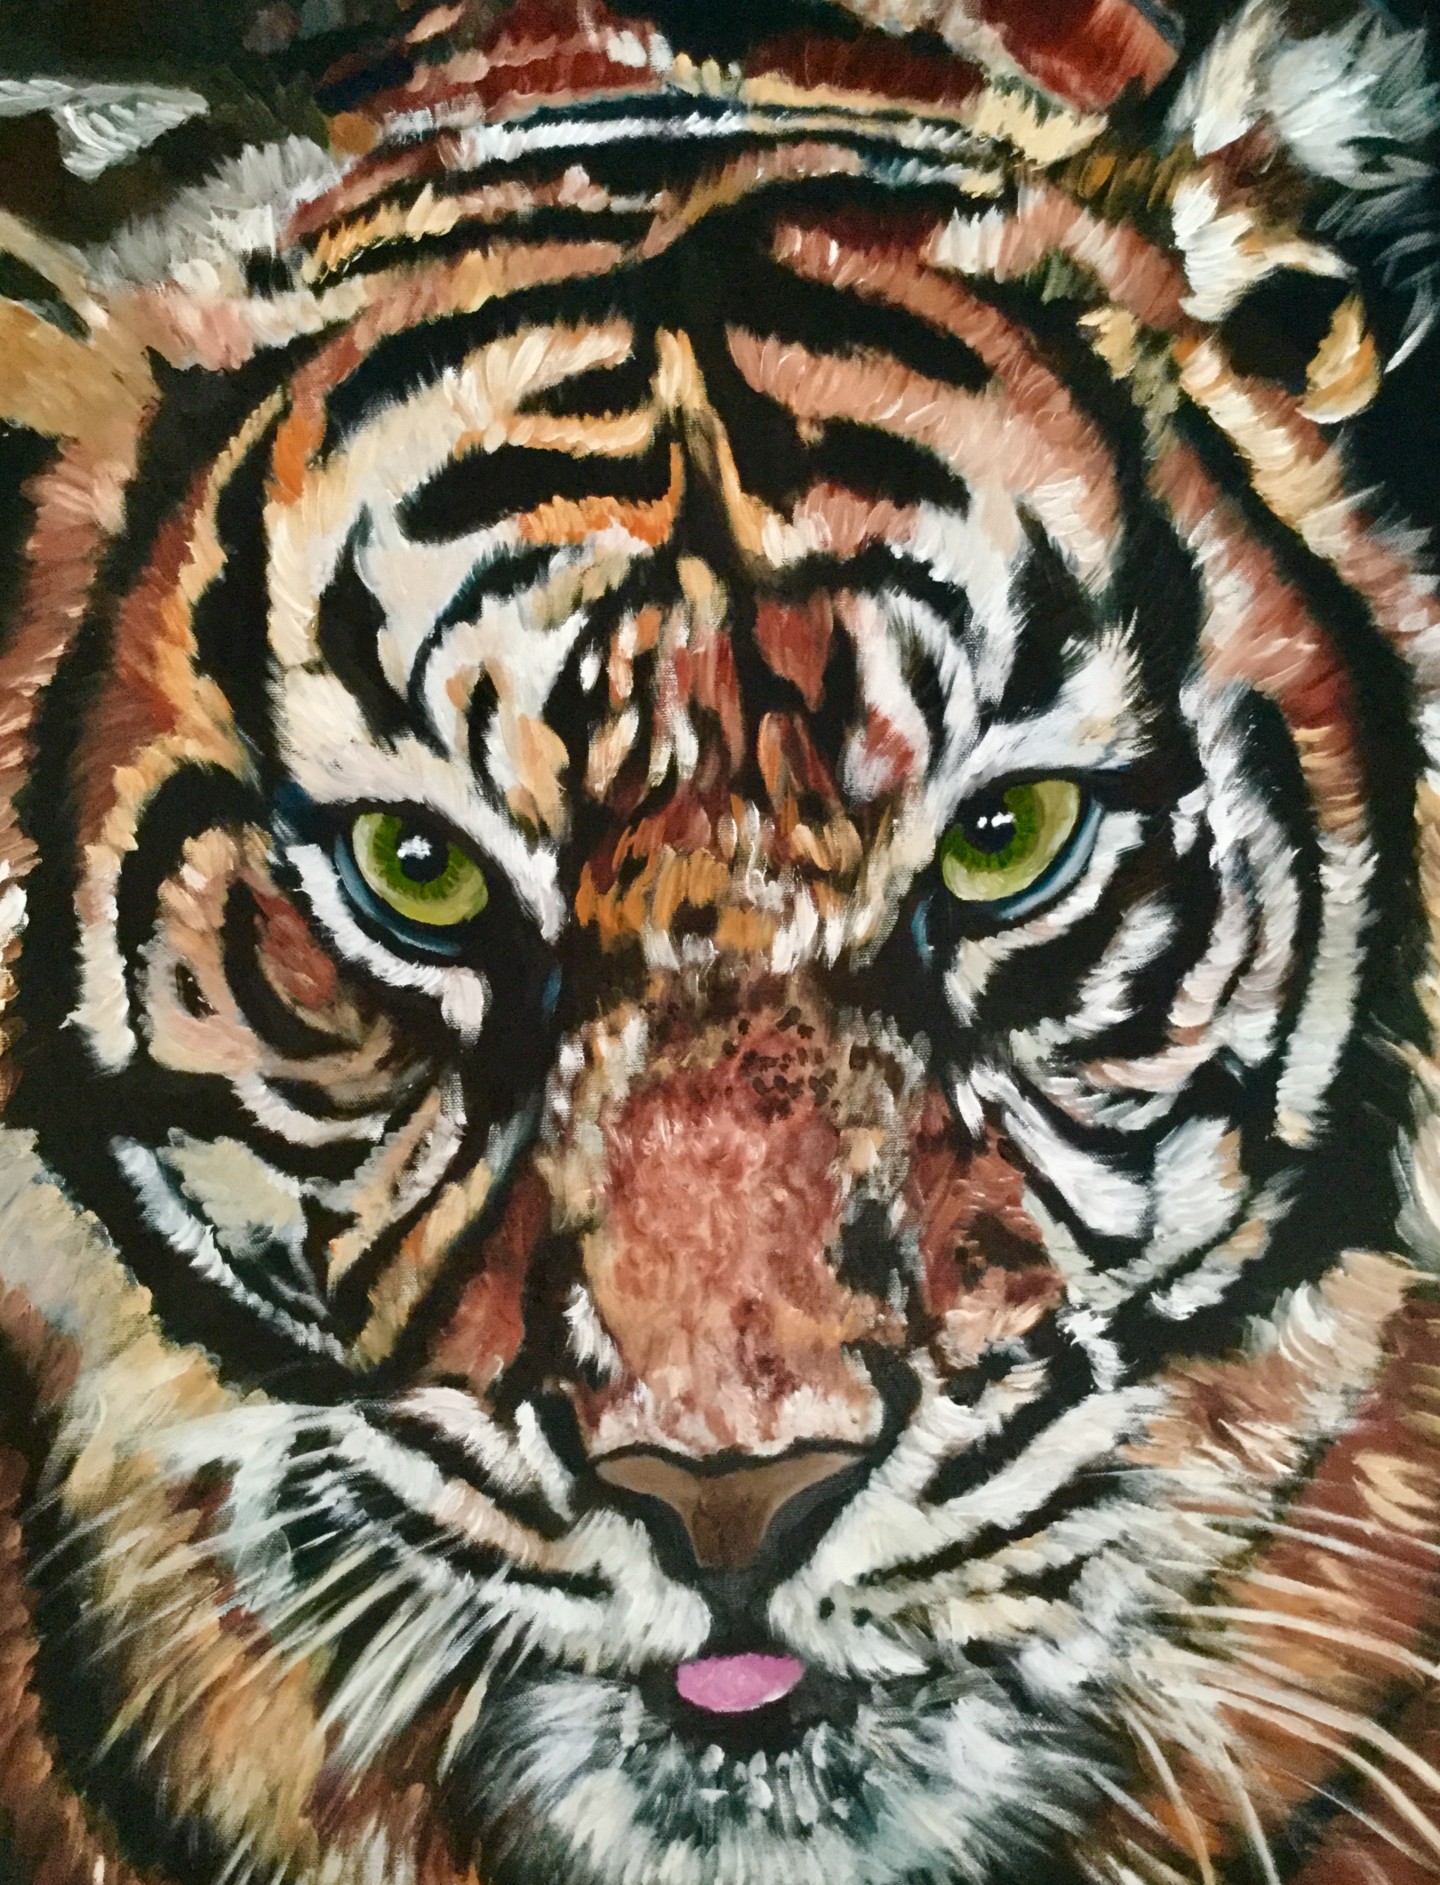 Eye 10x12 FT Backdrop Photographers,Tiger Eyes Graphic Mascot Animal Face Bengal Cat Safari Predator Theme Background for Photography Kids Adult Photo Booth Video Shoot Vinyl Studio Props 